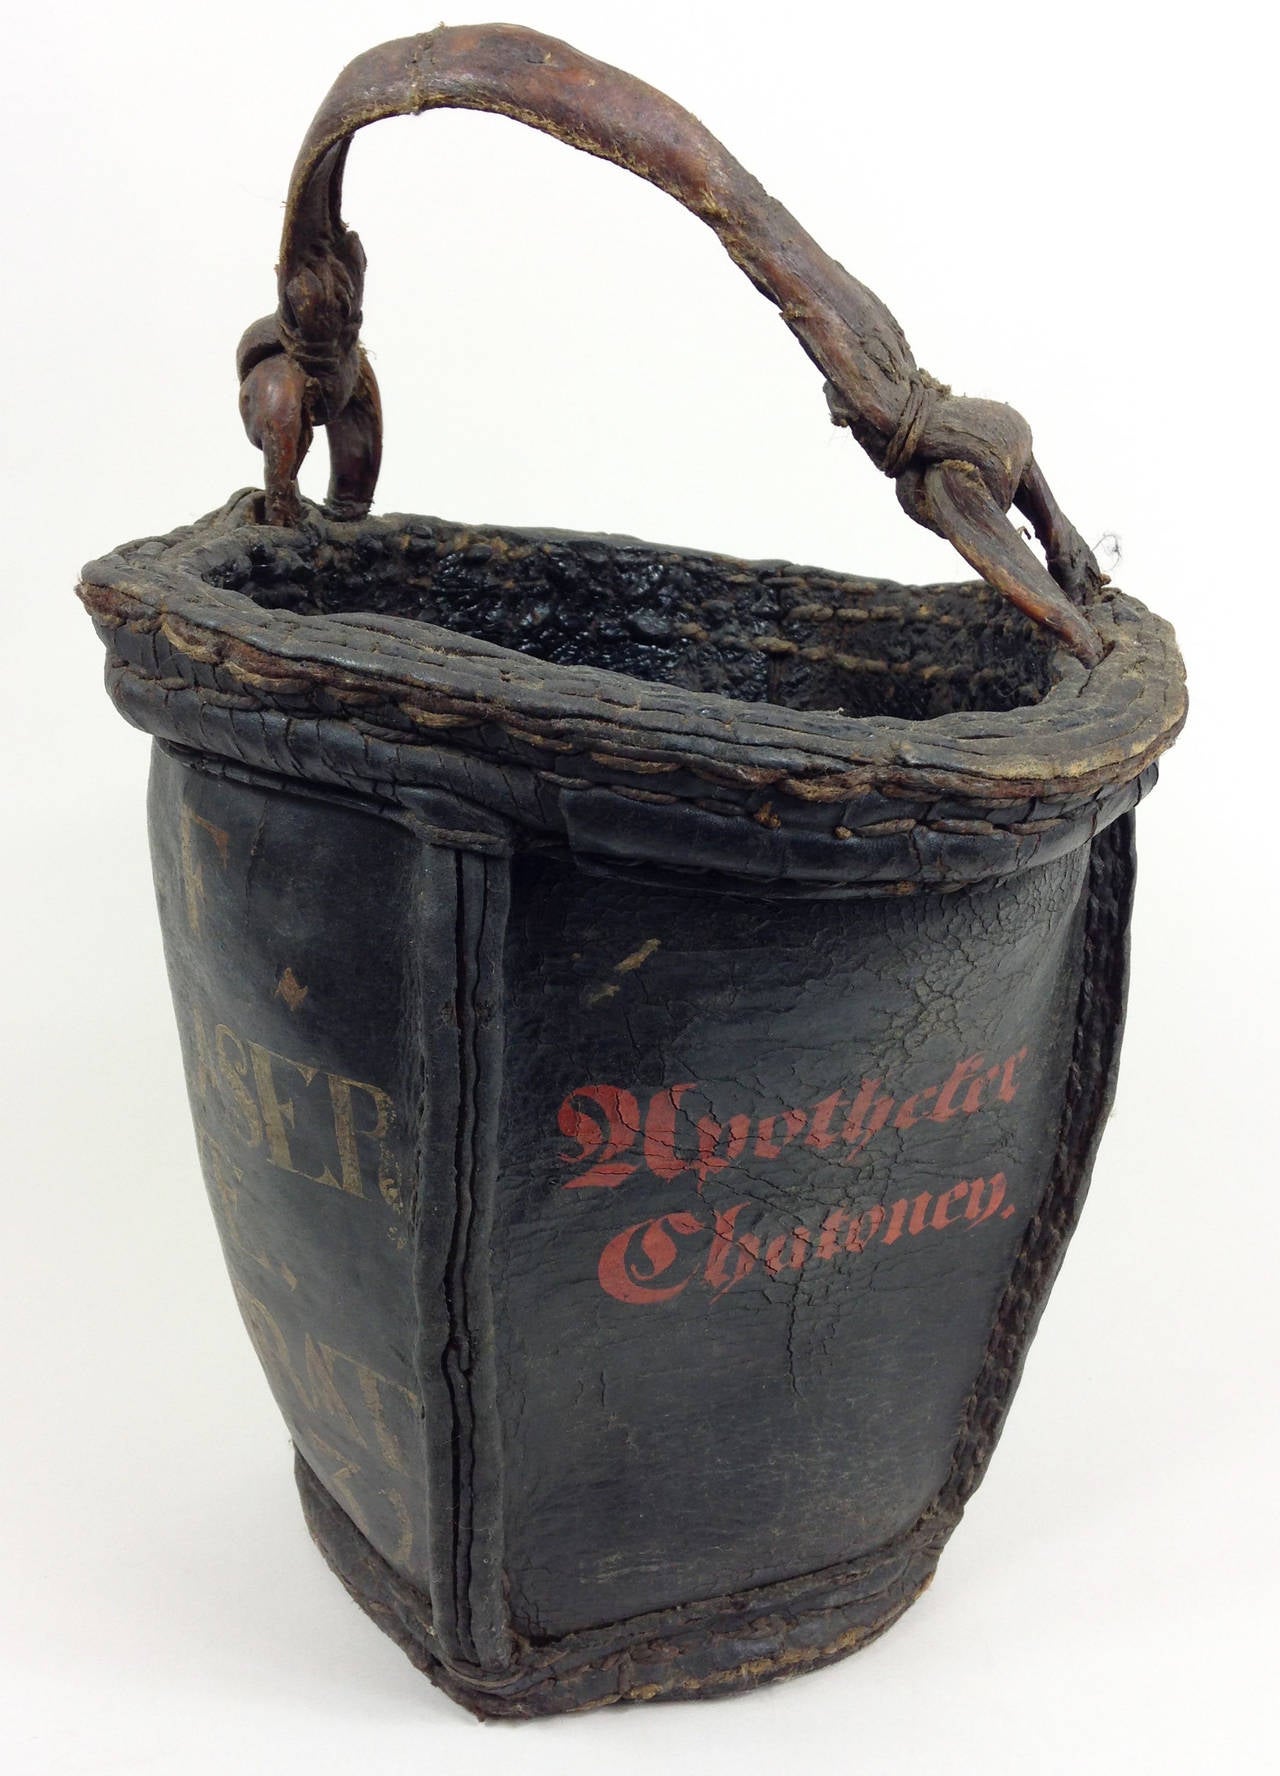 A very rare Swiss tarred leather fire bucket with various painted decorations.

Natural age related distortion and warping as often found on leather products of this age but still displays very well.

Untouched and unrestored.

Height stated